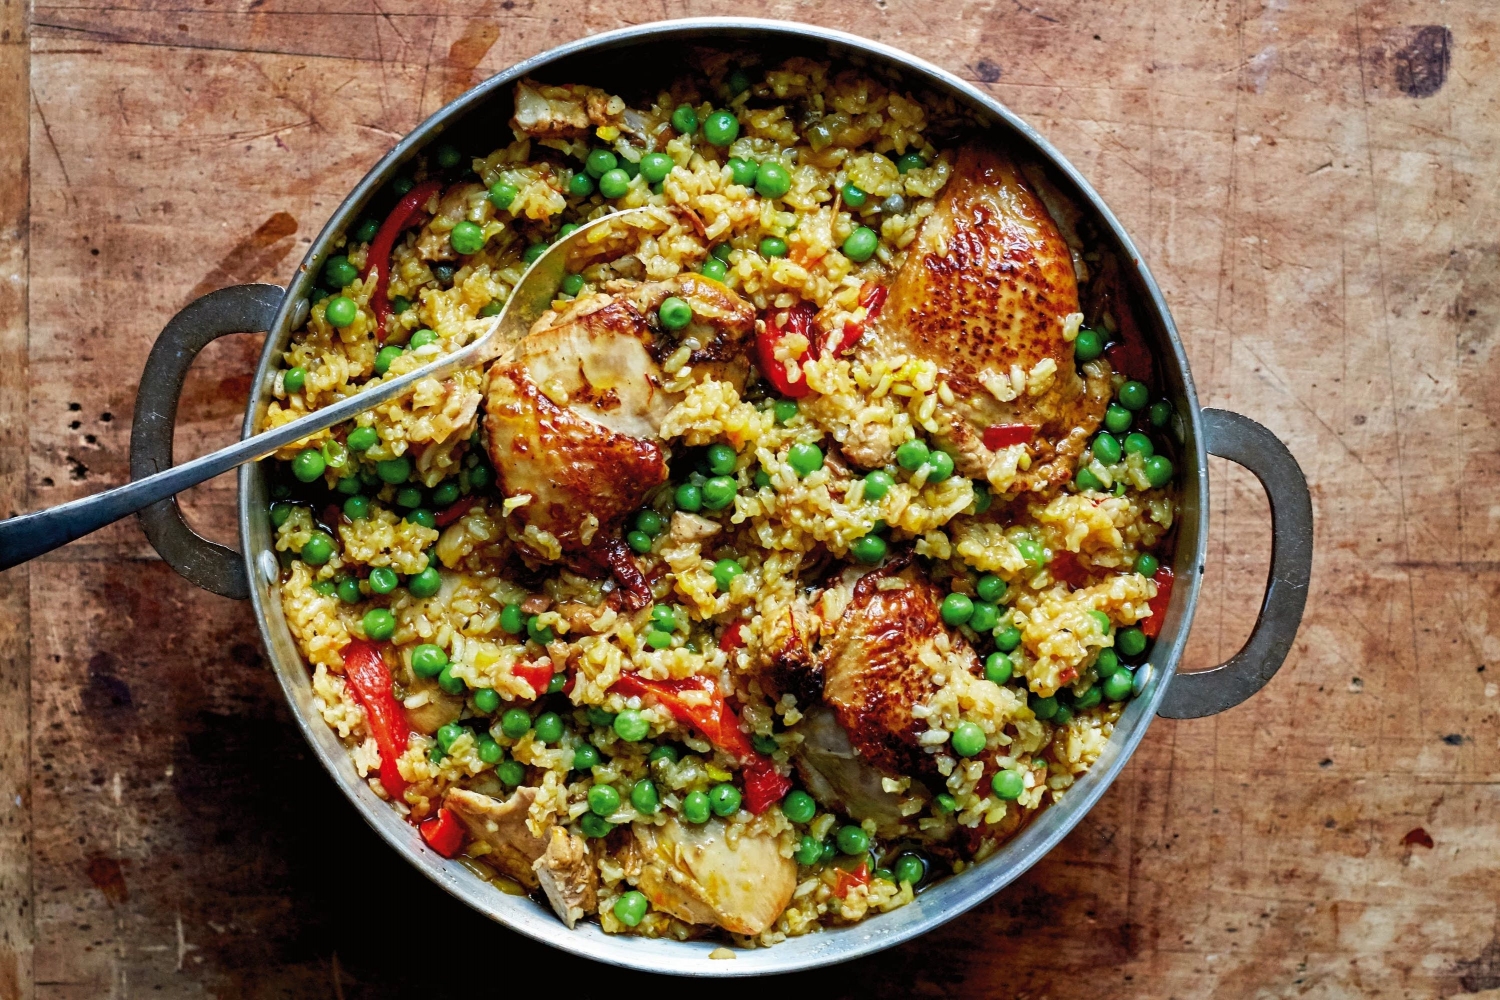 PICK-UP DINNER: Arroz con Pollo Panameño by Rossy Earle – The Depanneur